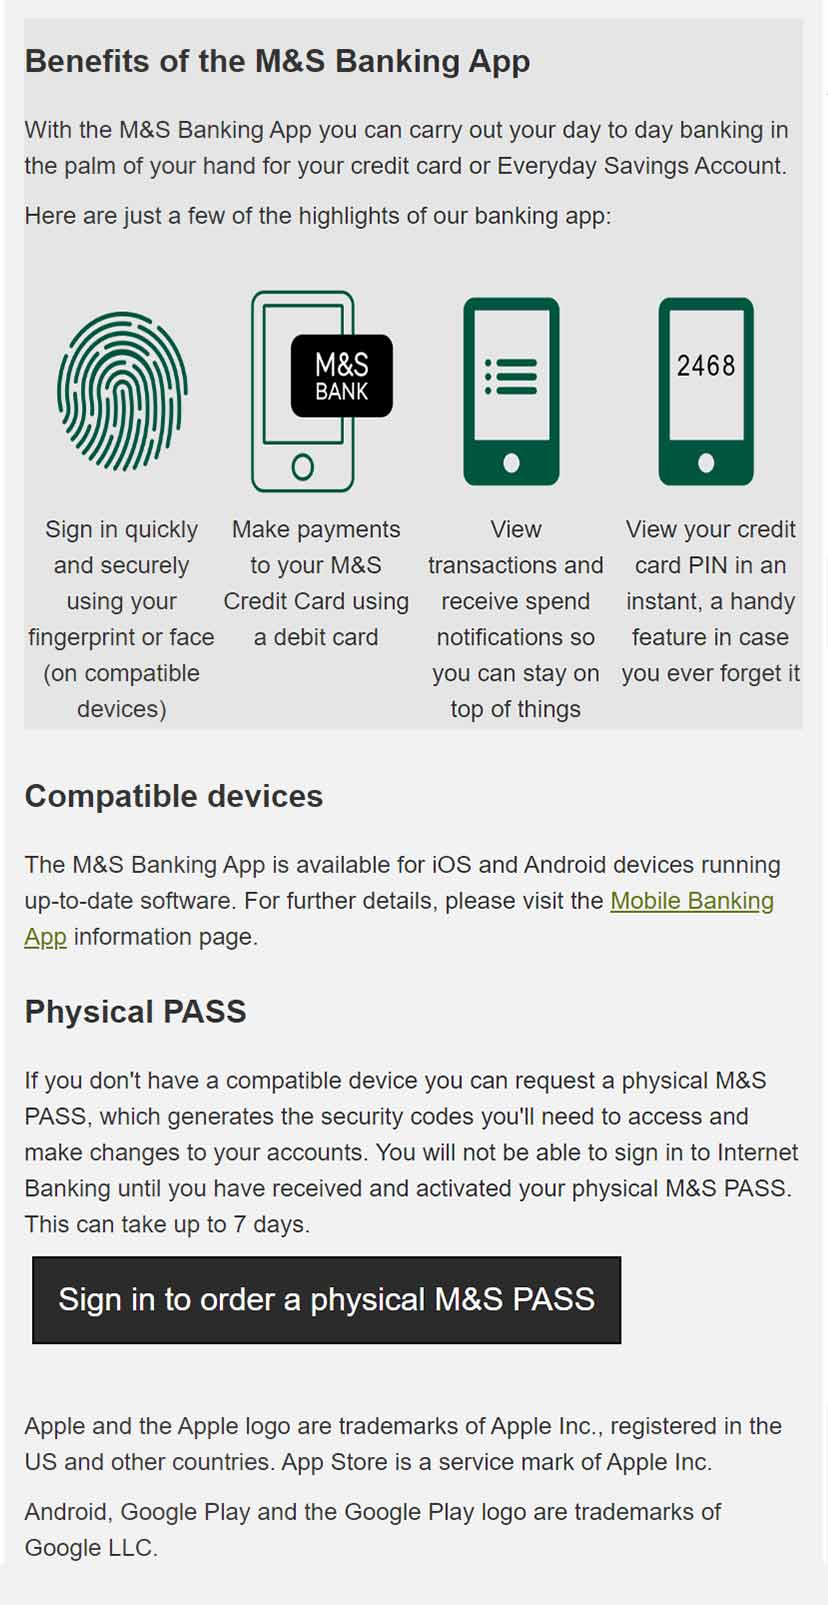 Internet Banking registration select your M&S PASS screen.